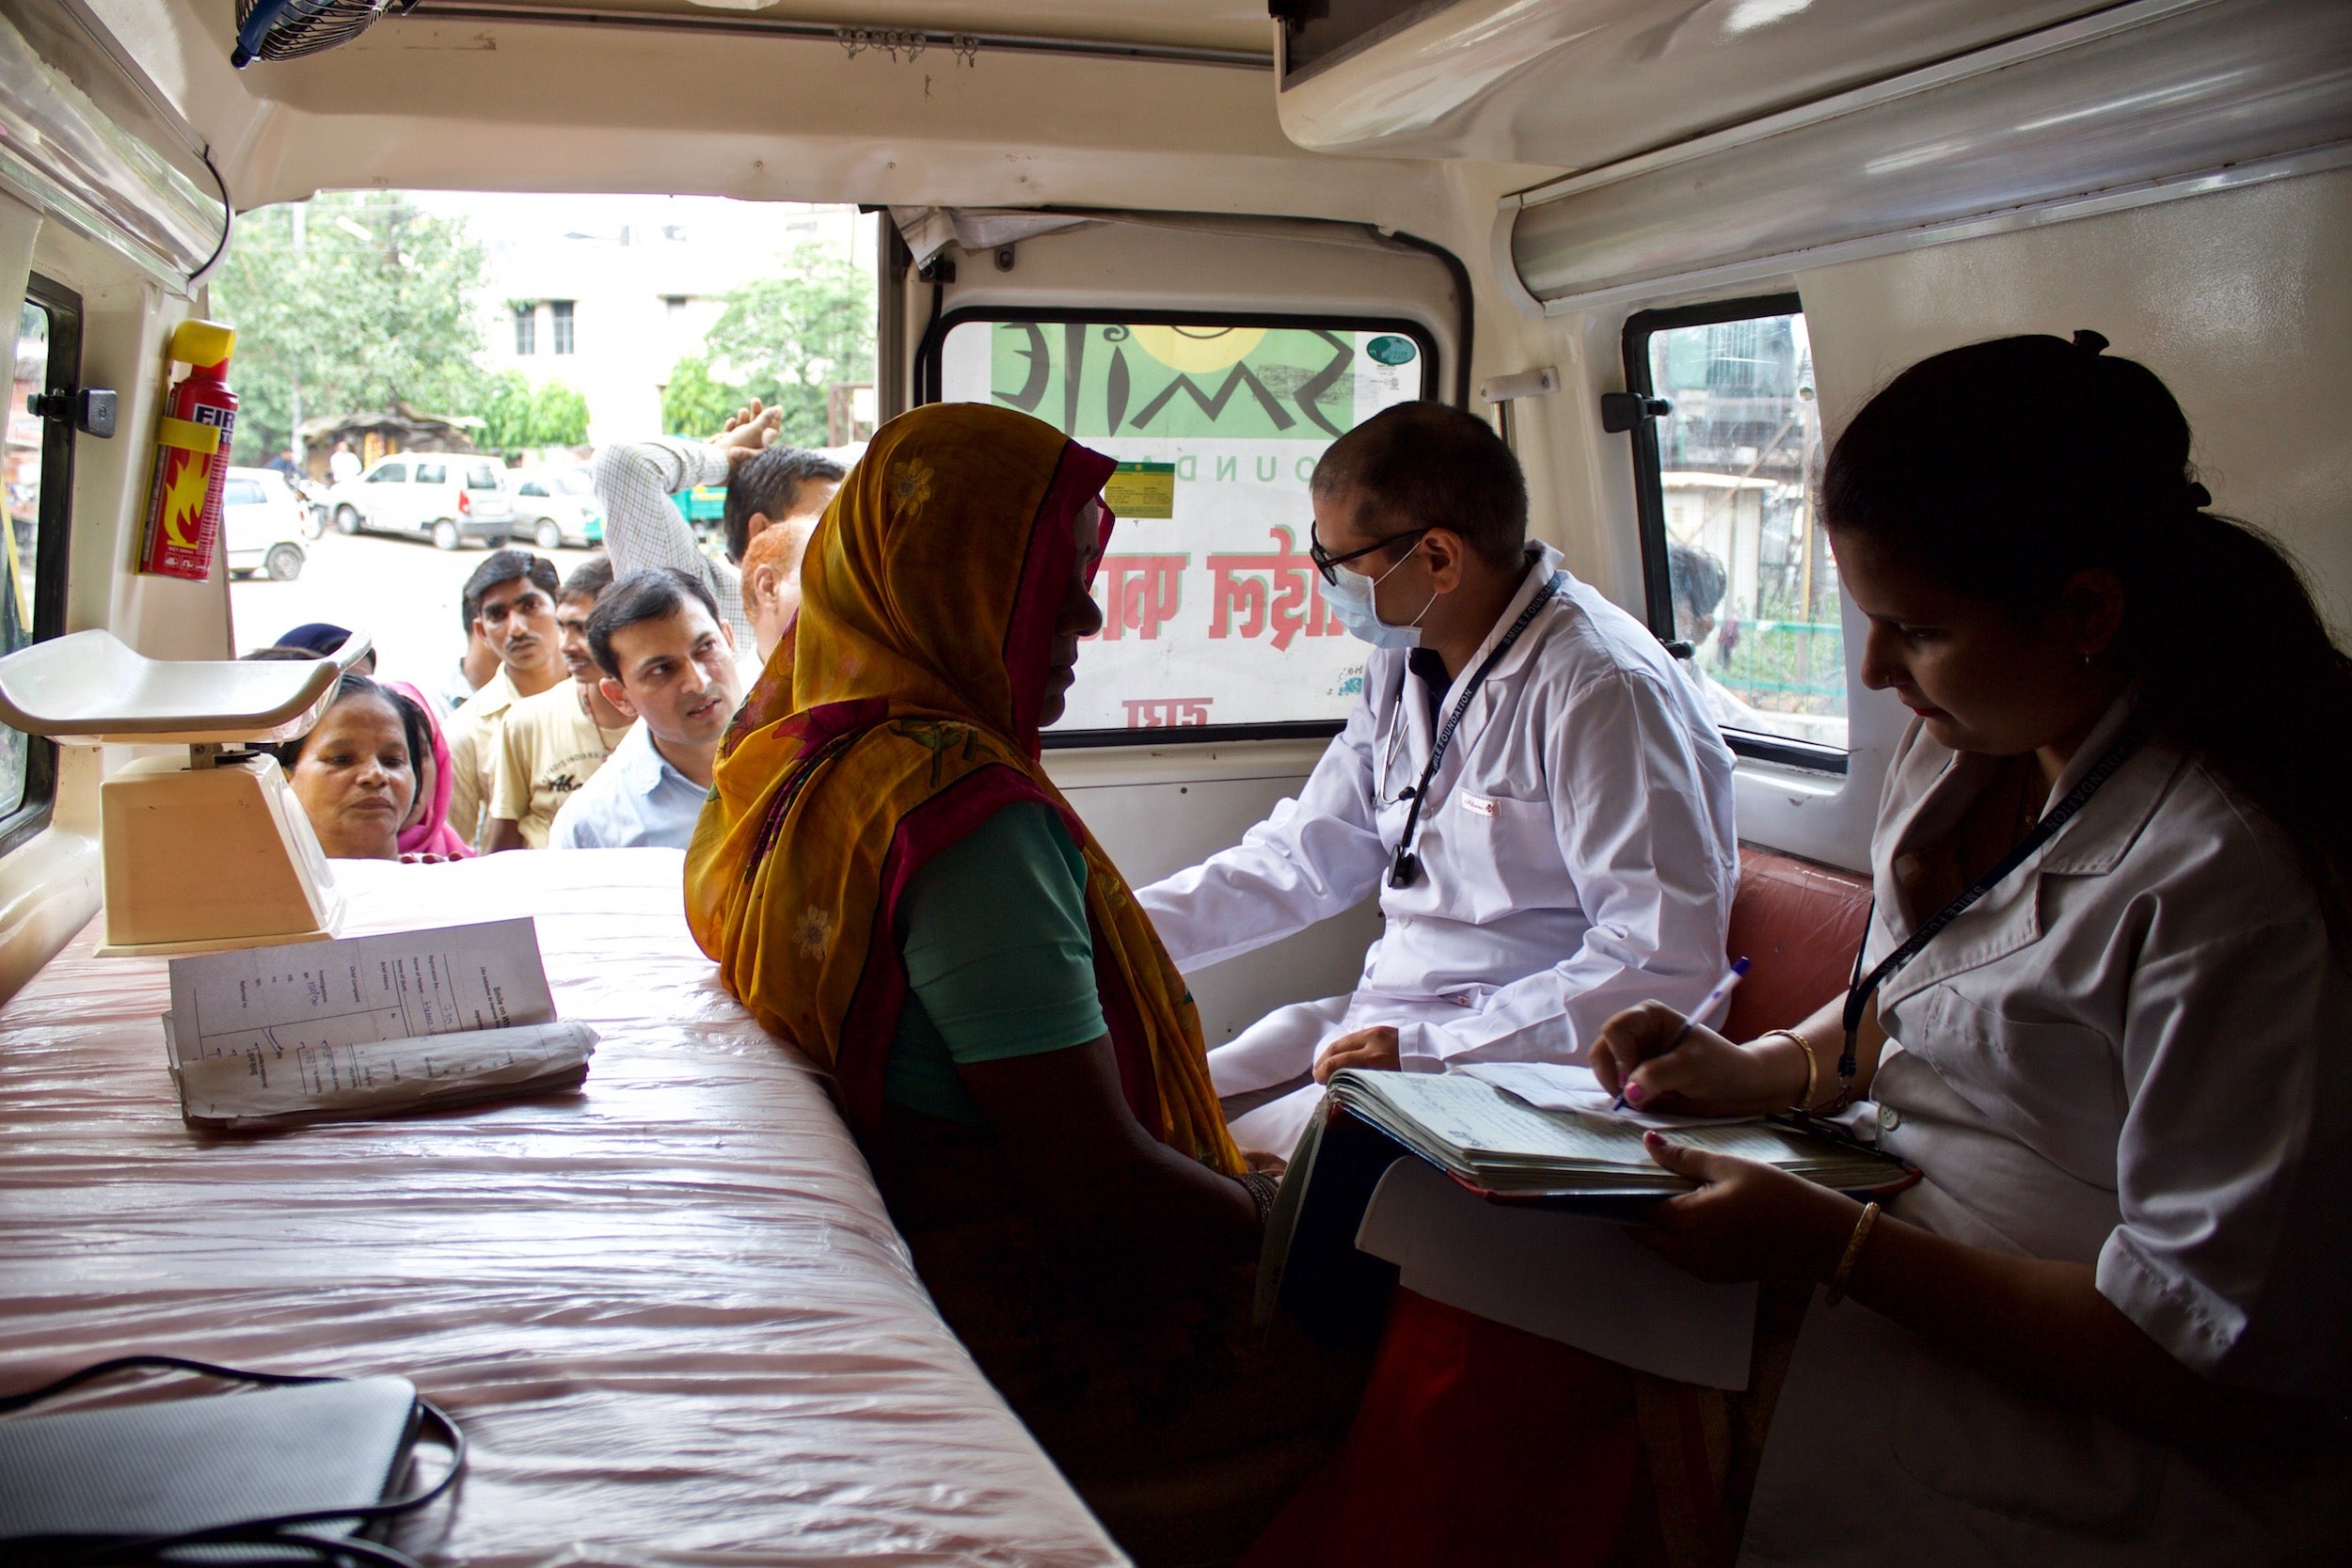 The Smile Foundation's doctors treat patients in a mobile hospital, stepping in where India's underfunded public health system falls short